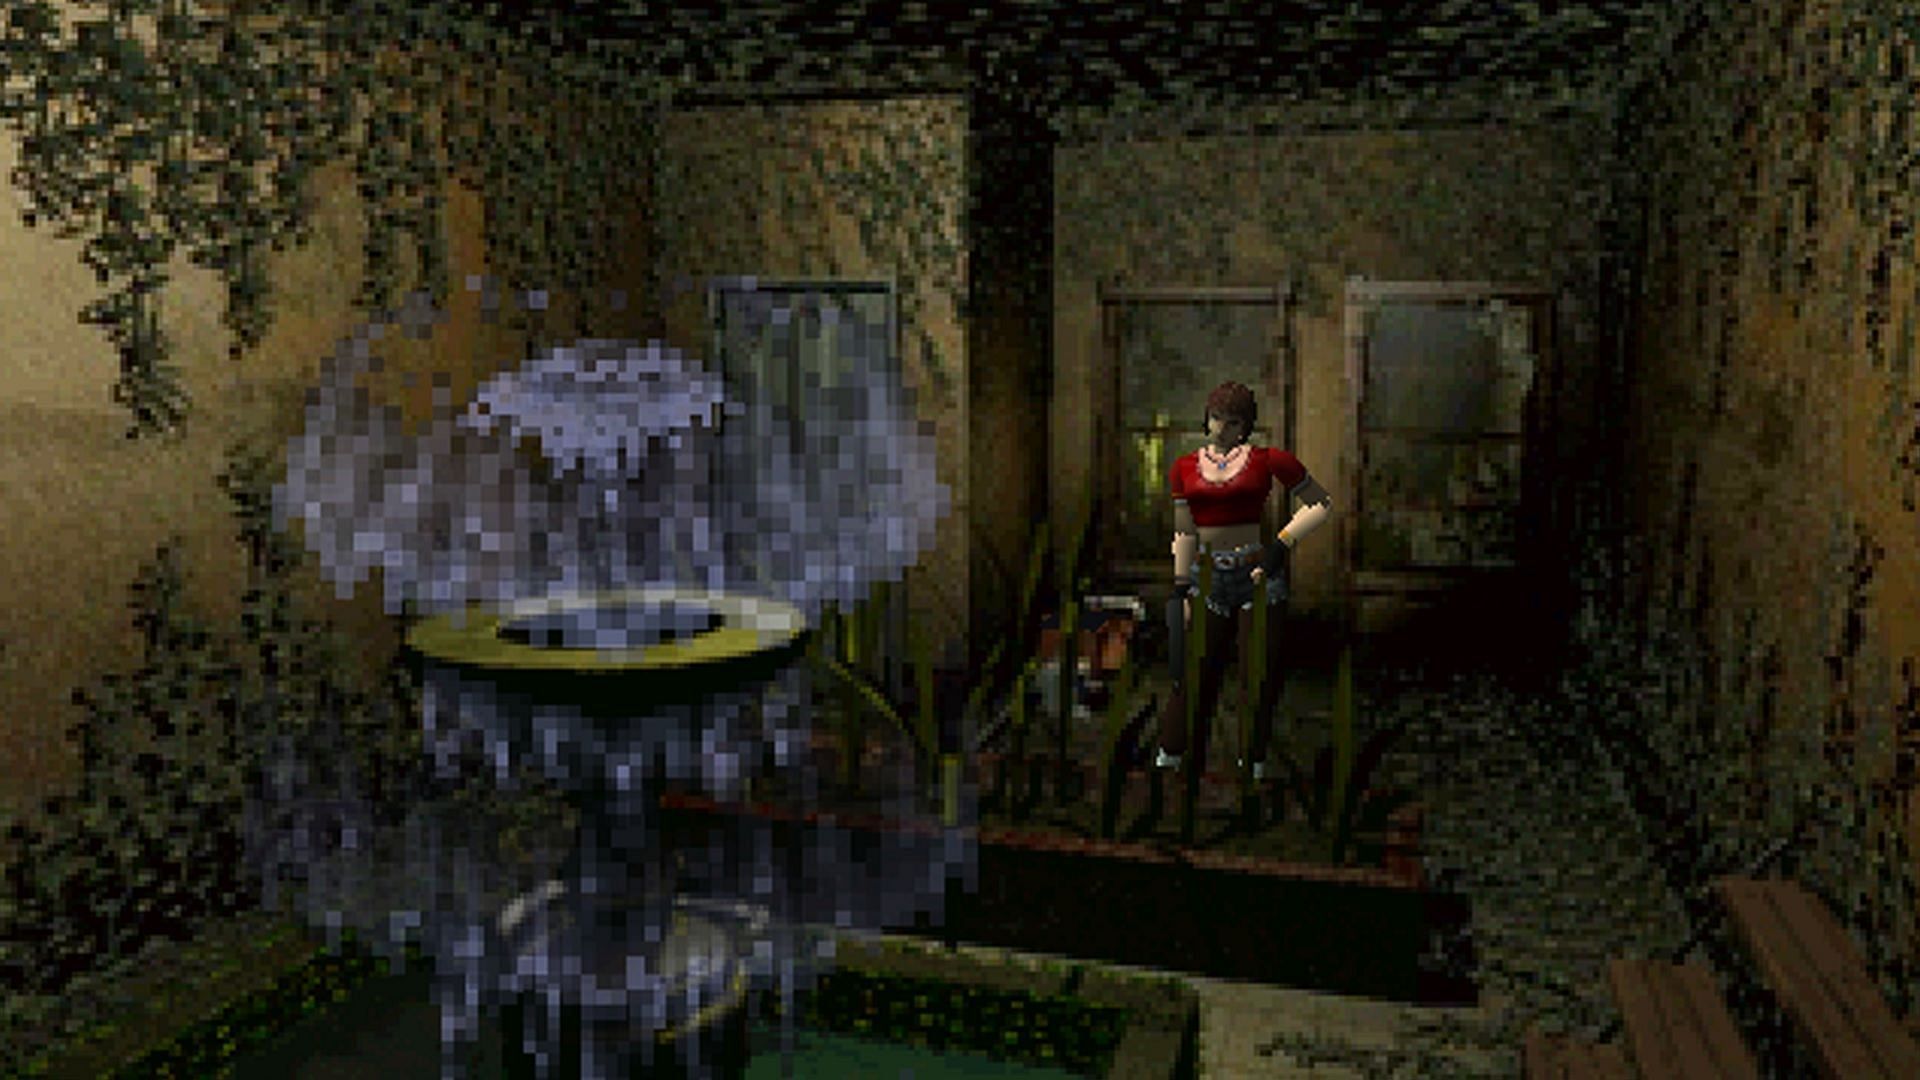 The first original Resident Evil game from 1996 has been re-released for PC with uncensored horror elements